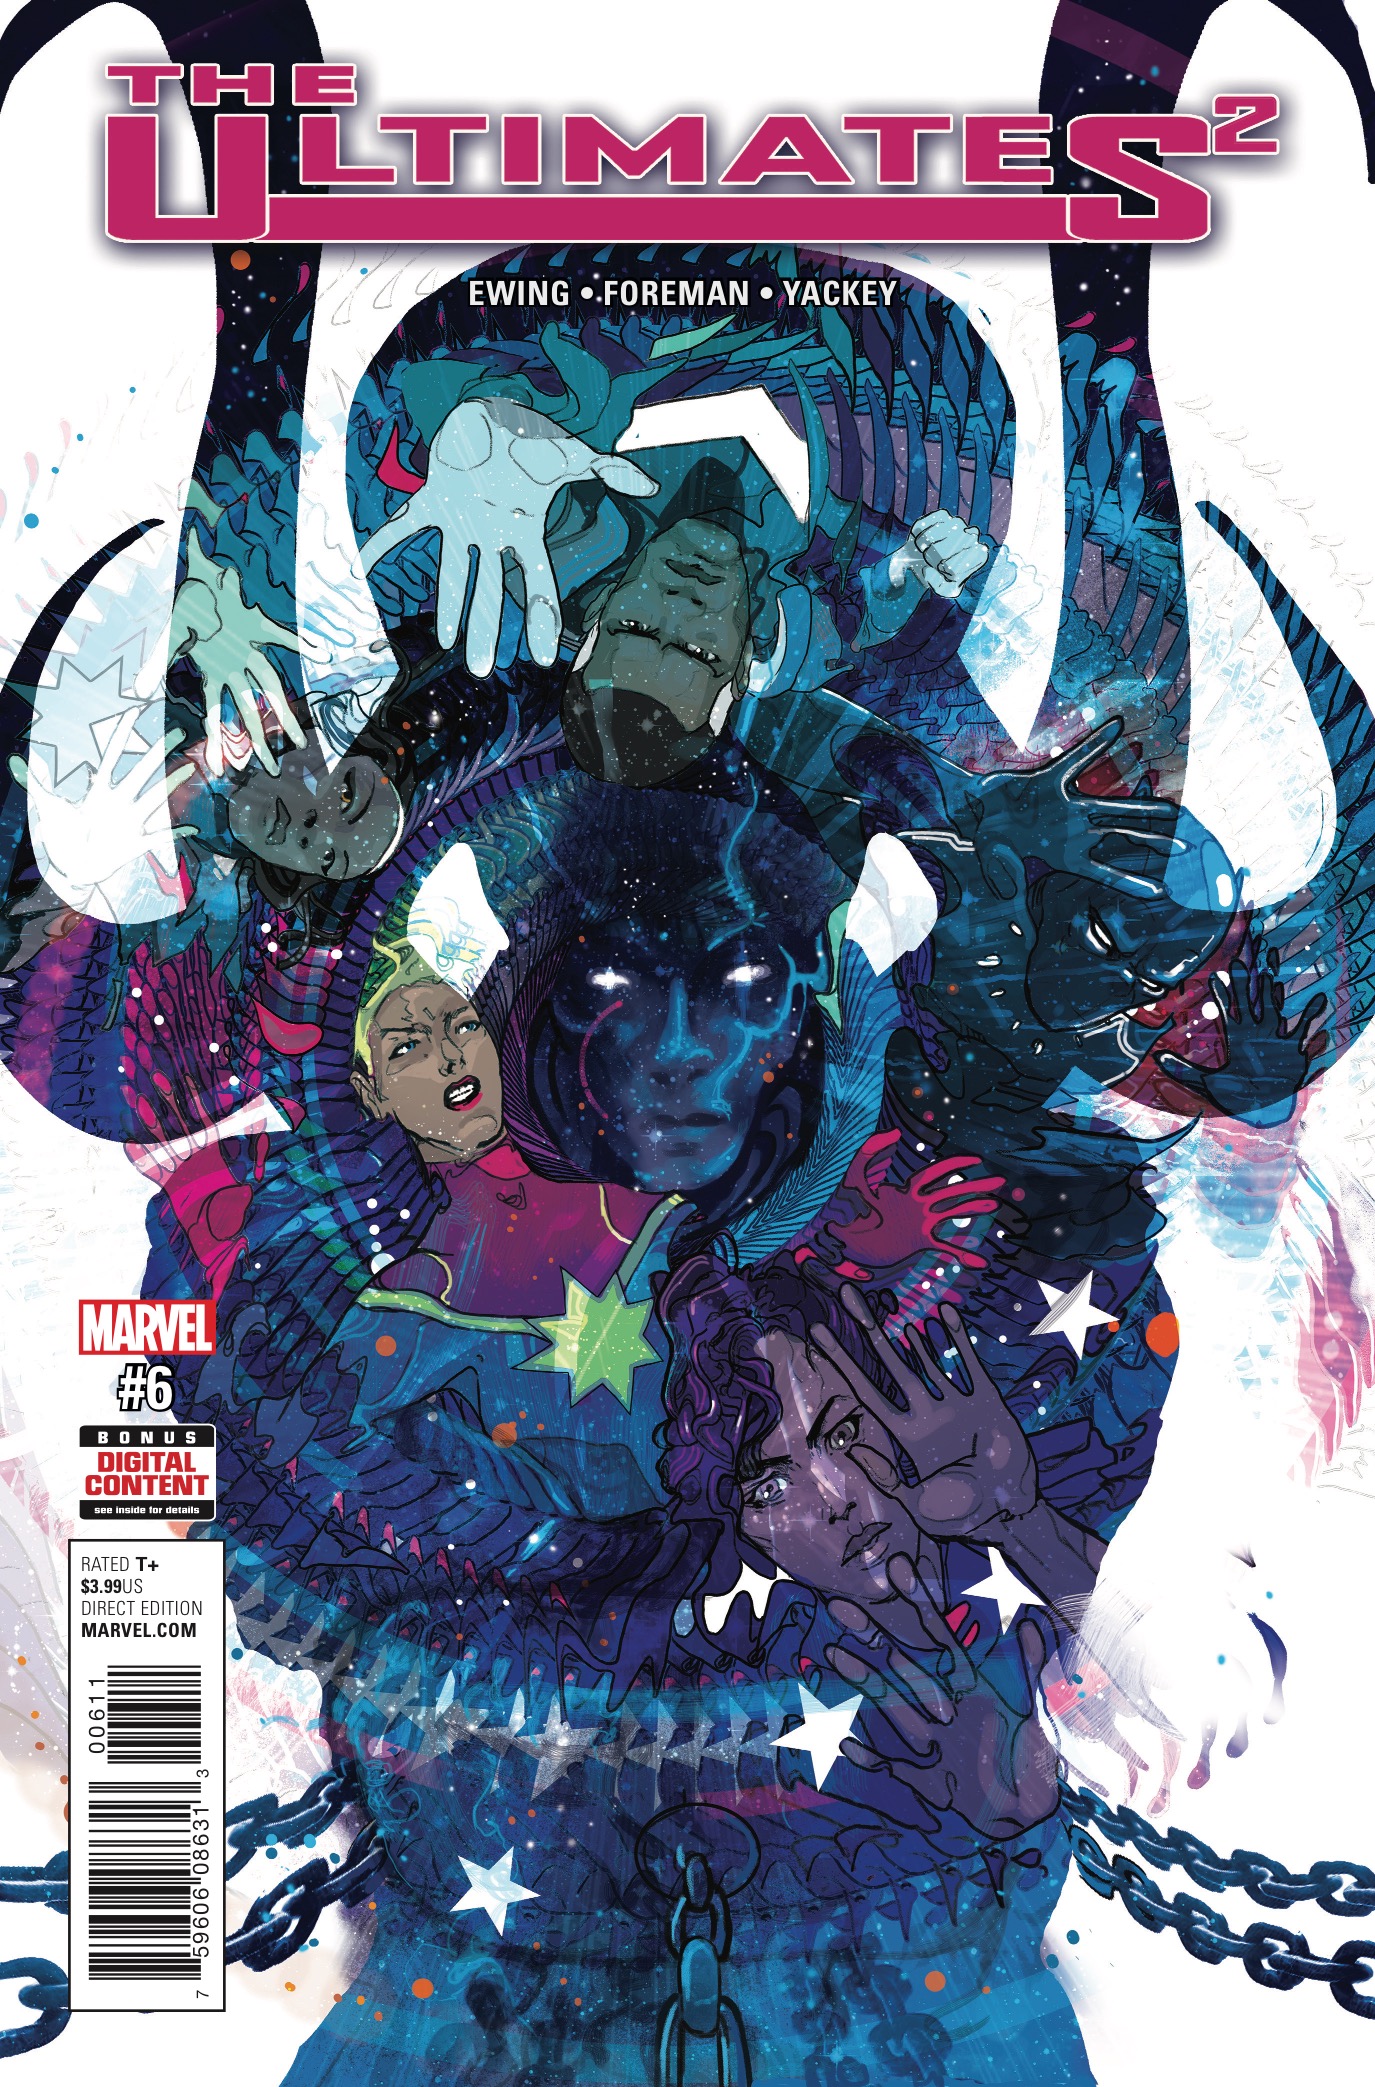 Marvel Preview: Ultimates 2 #6